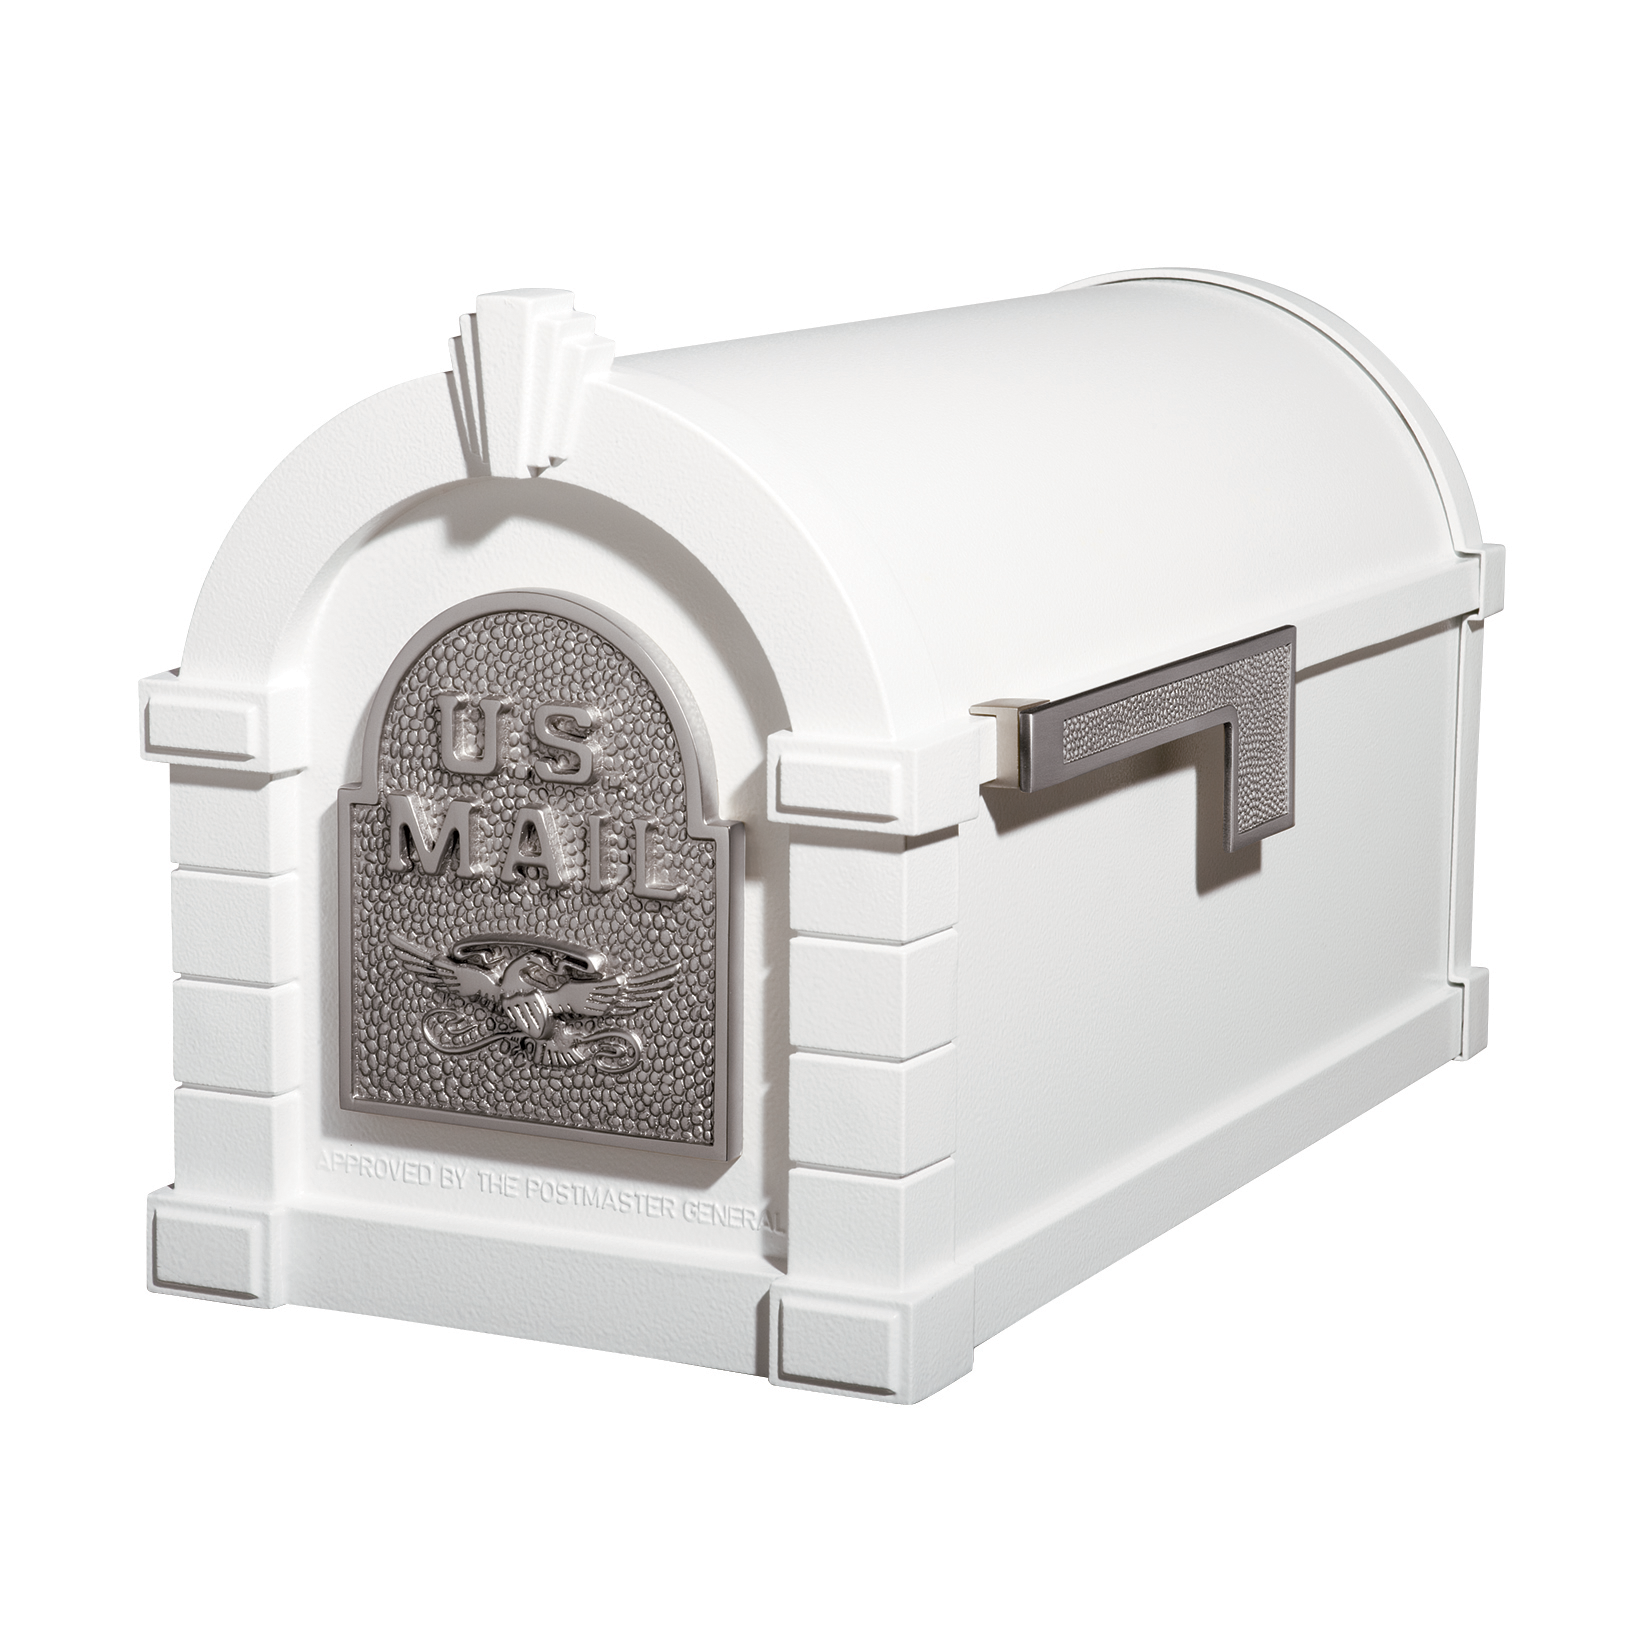 Gaines Eagle Keystone Mailboxes<br />White with Satin Nickel